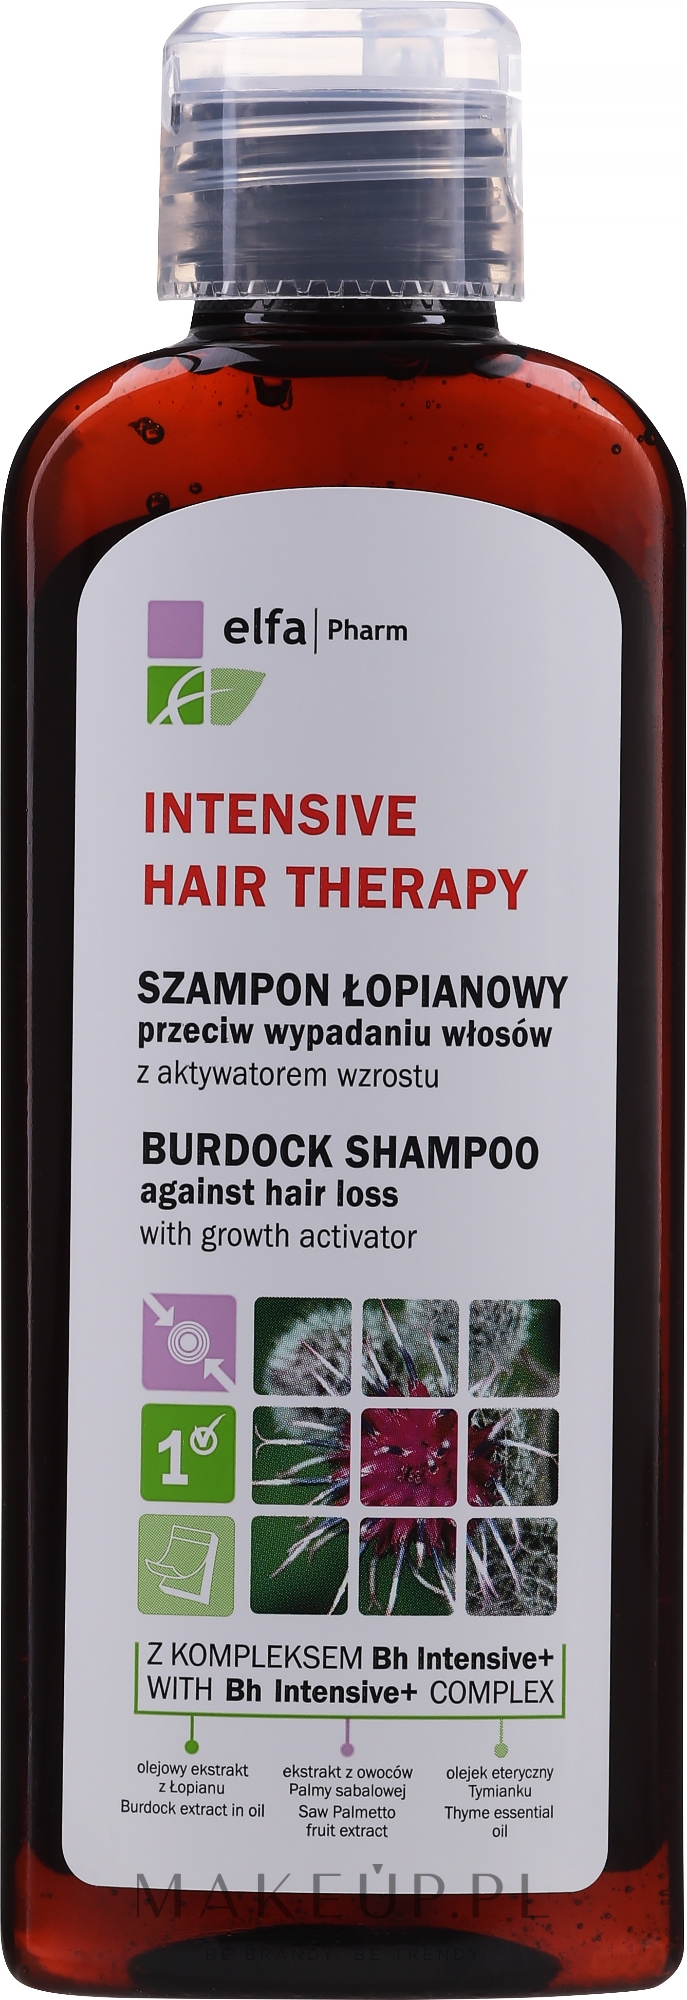 intensive hair therapy szampon łopianowy